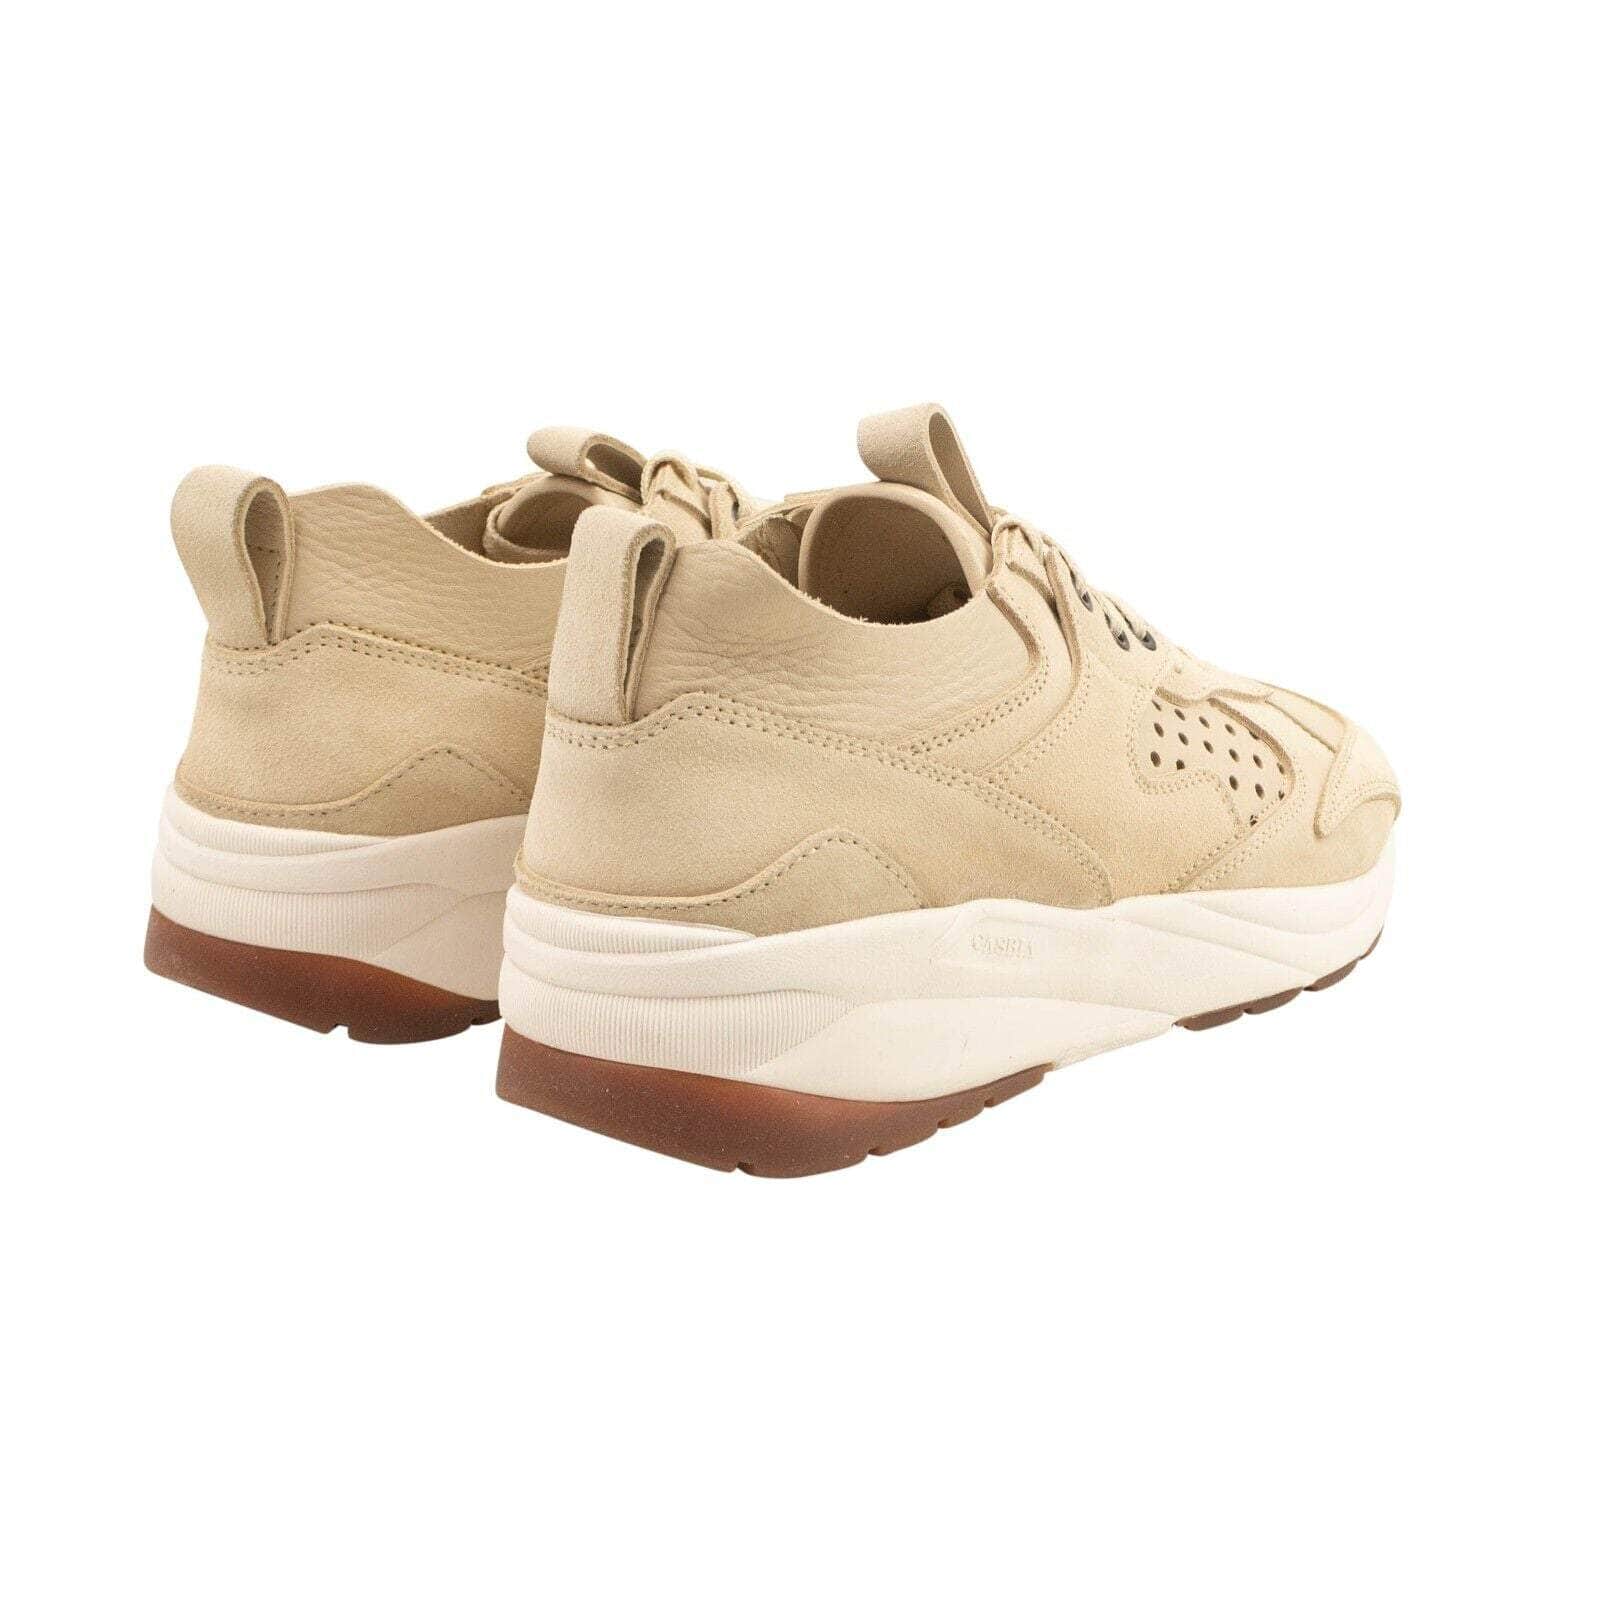 Casbia casbia, channelenable-all, chicmi, couponcollection, gender-mens, main-shoes, mens-shoes, MixedApparel, size-40, size-41, size-42, size-43, size-44, size-45, size-46, under-250 Beige Skin Veloce Low Top Suede Sneakers